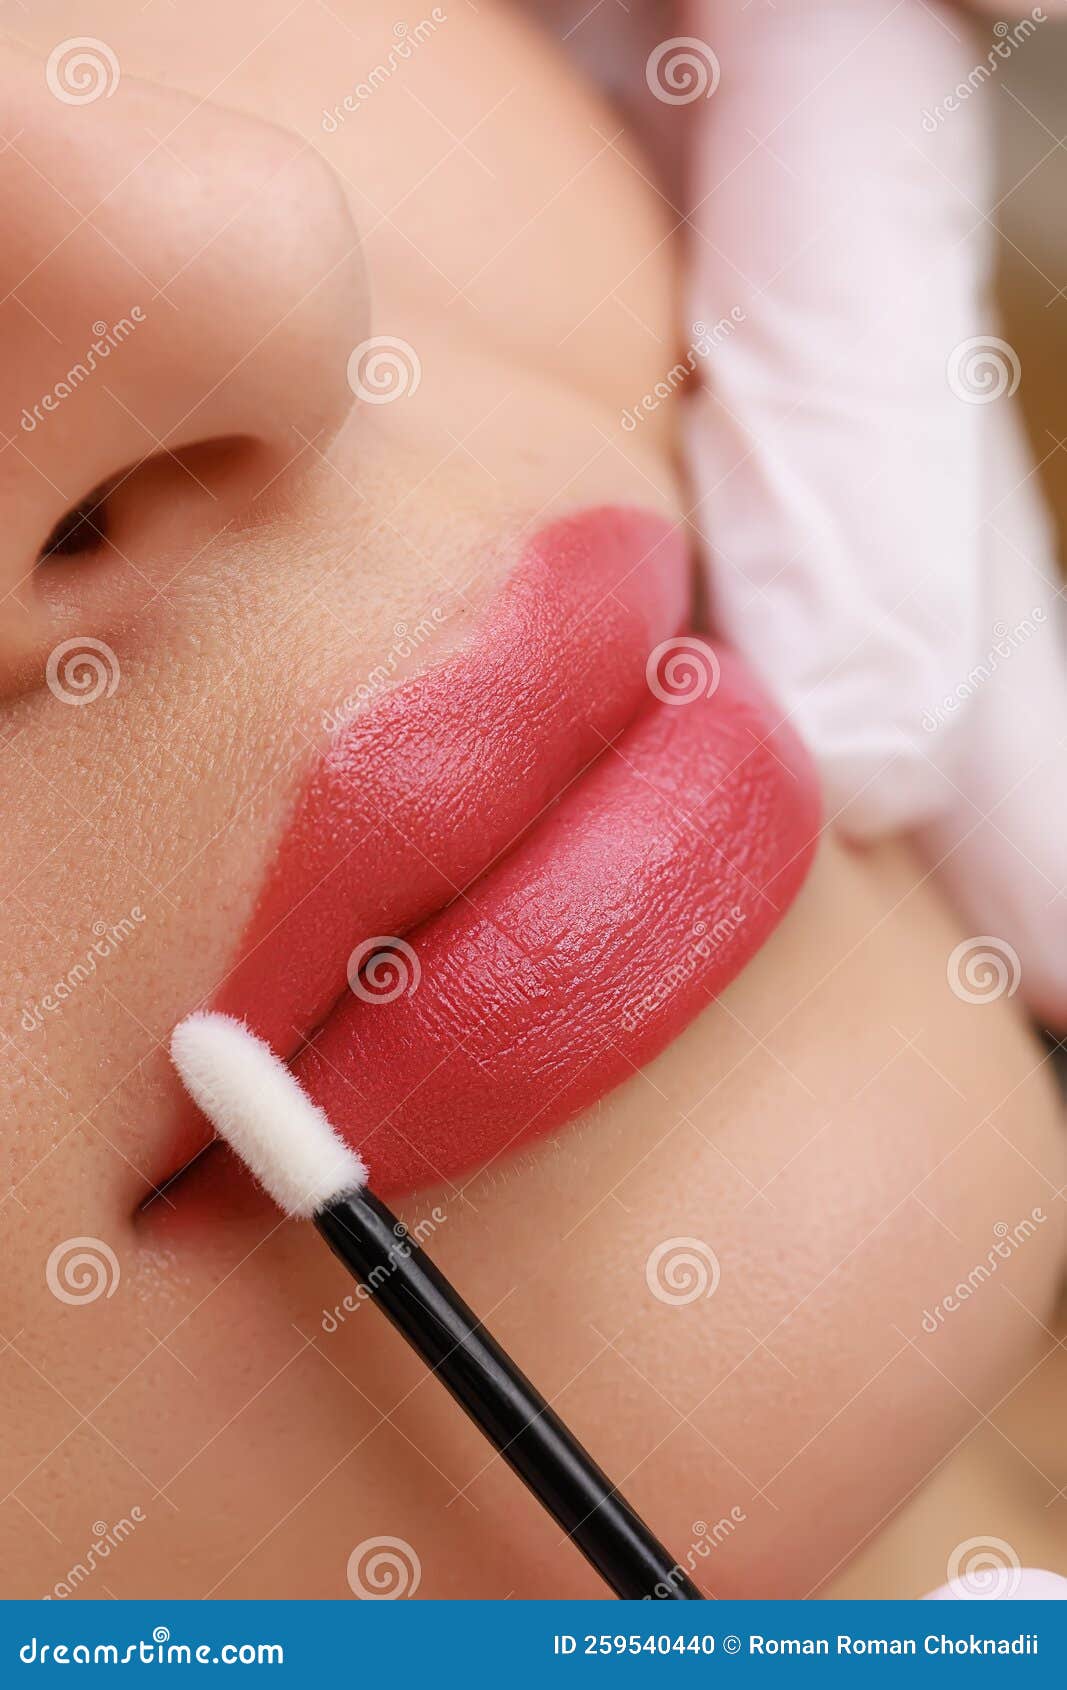 the lips, on which permanent makeup is made, are wiped by the master with a microbrush, thereby moisturizing them after tattooing